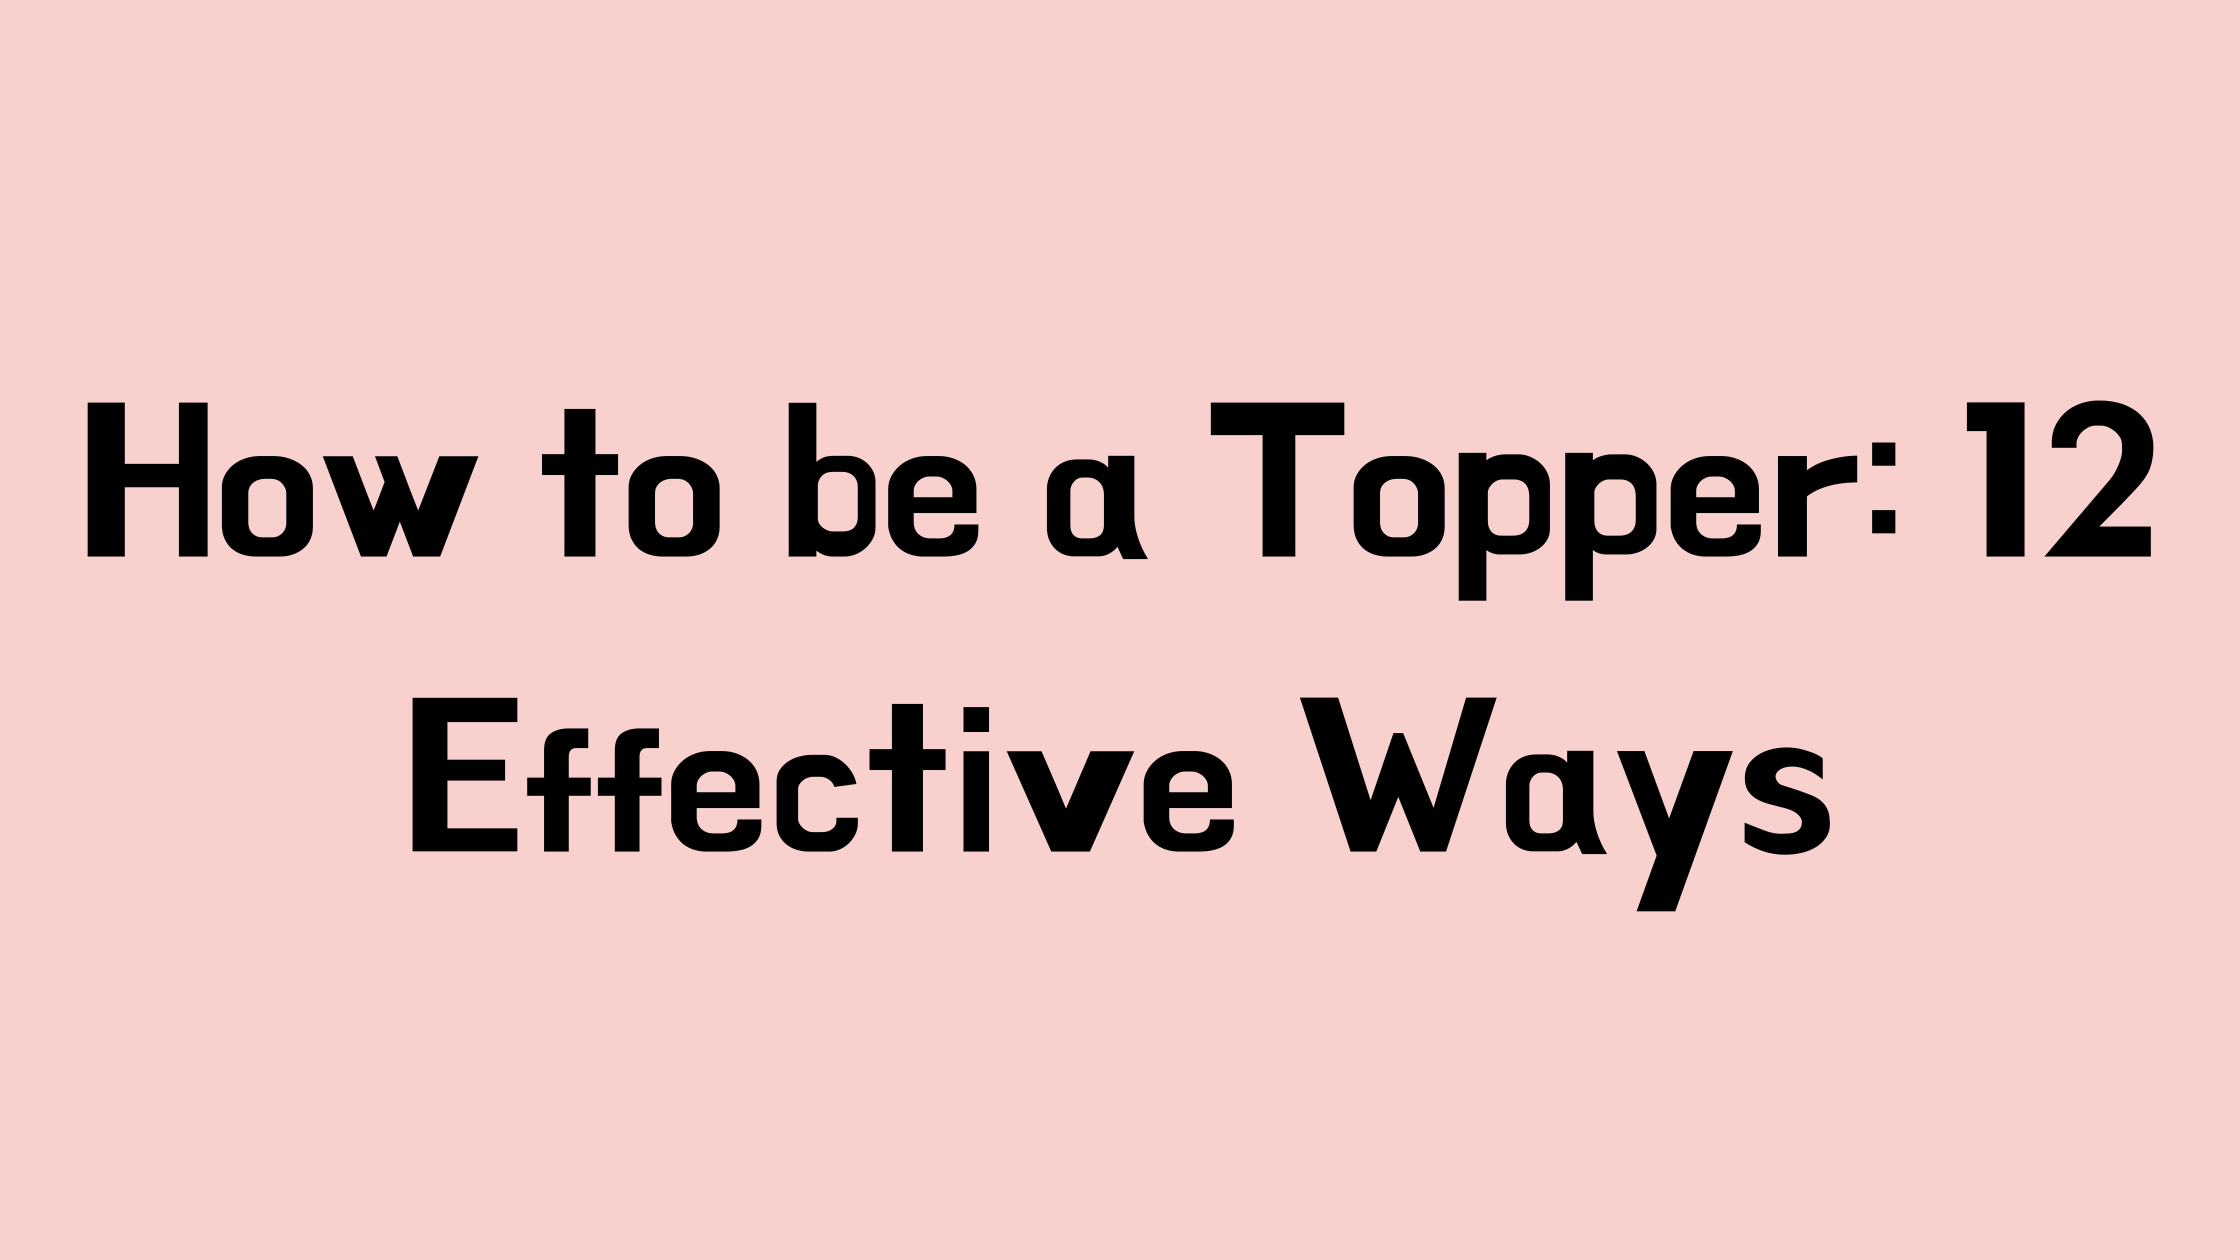 How to be a Topper